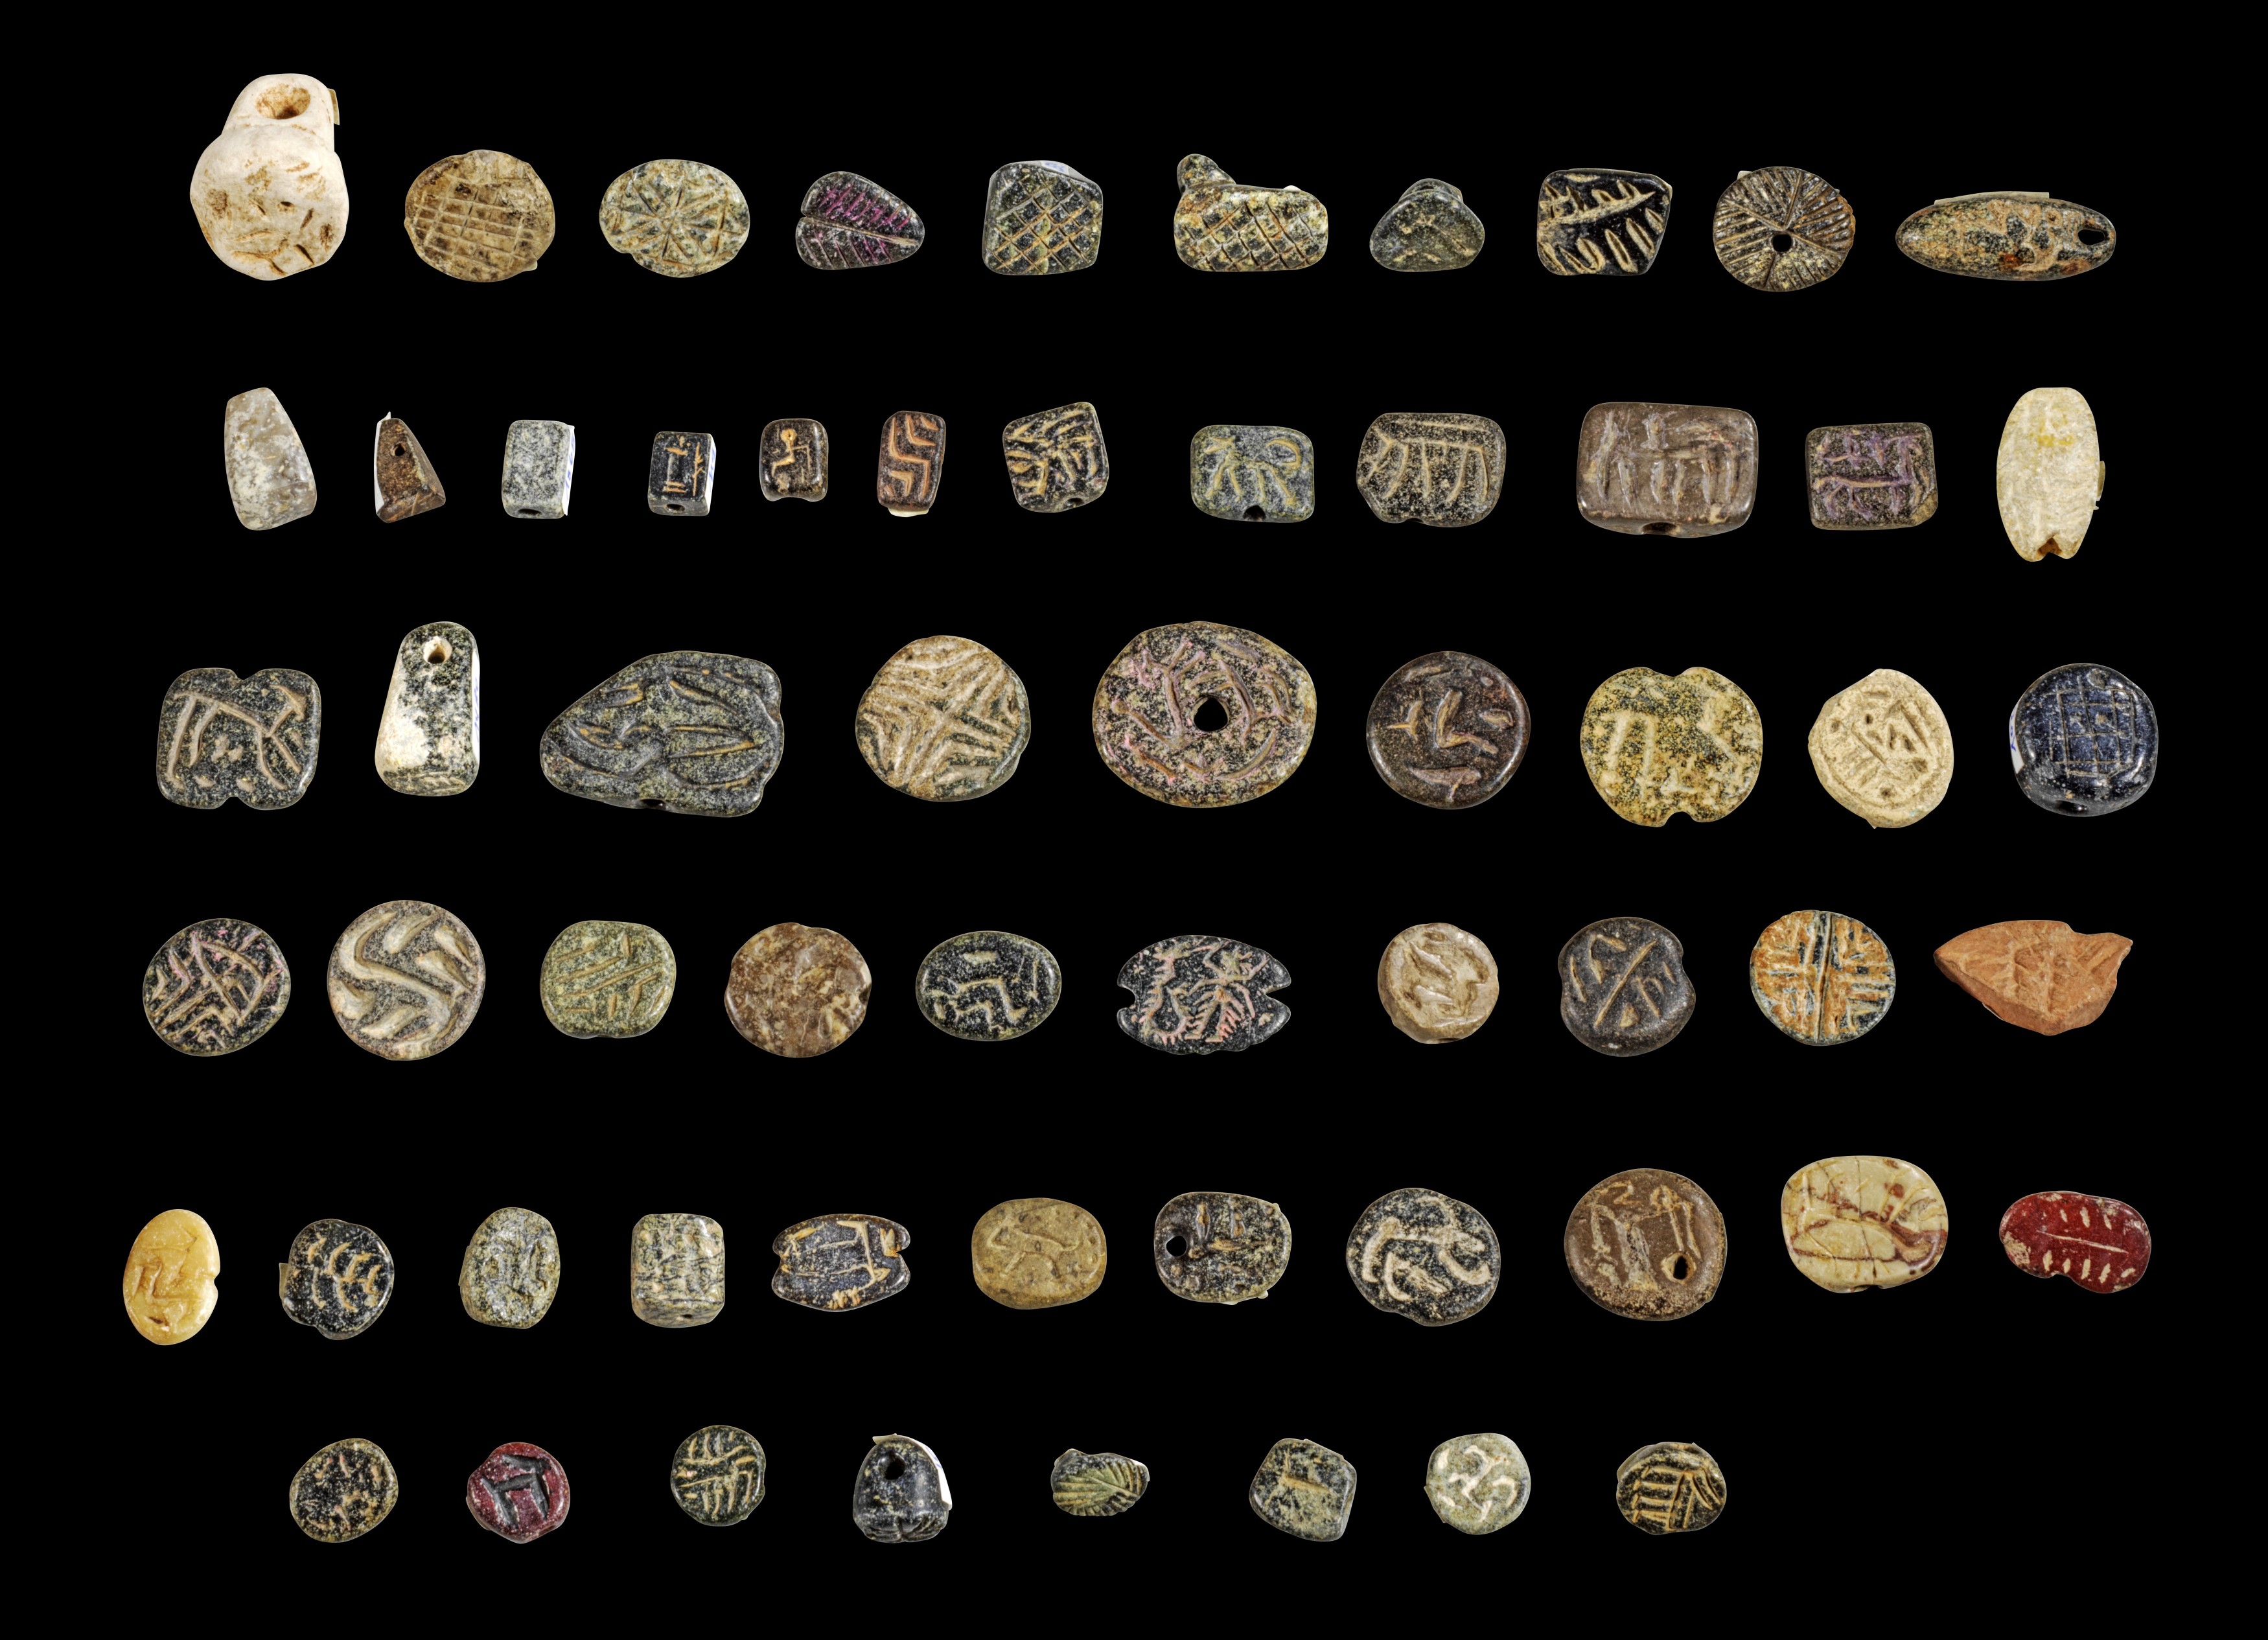 Collection of small stamp seals made of black and grey stones. 